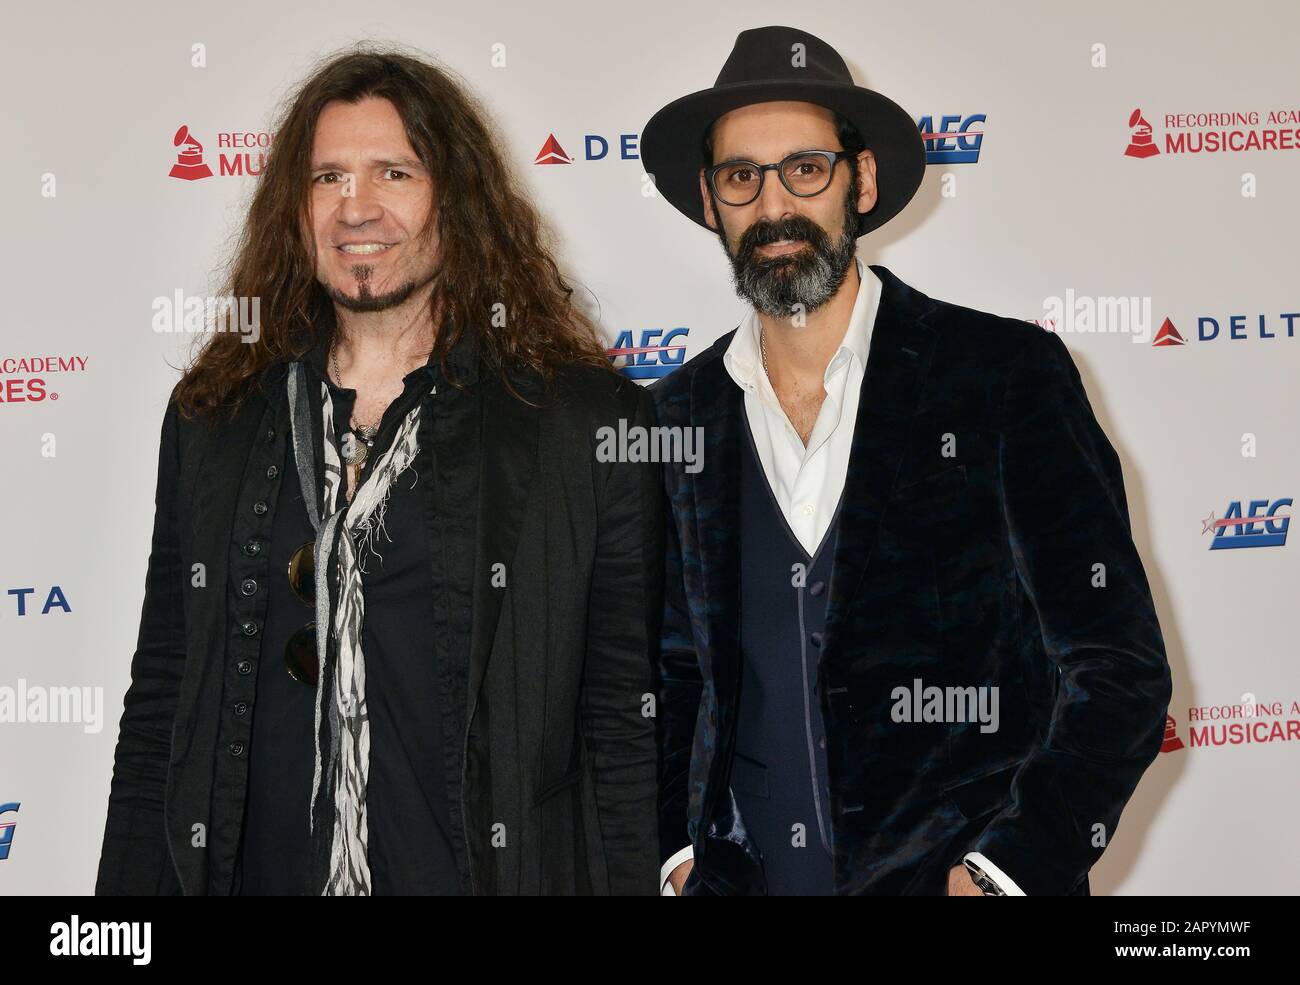 Los Angeles, USA. 24th Jan, 2020. Phil X - BonJovi, Cesar Gueikian -Gibson attends MusiCares Person of the Year honoring Aerosmith at West Hall at Los Angeles Convention Center on January 24, 2020 in Los Angeles, California. Credit: Tsuni/USA/Alamy Live News Stock Photo